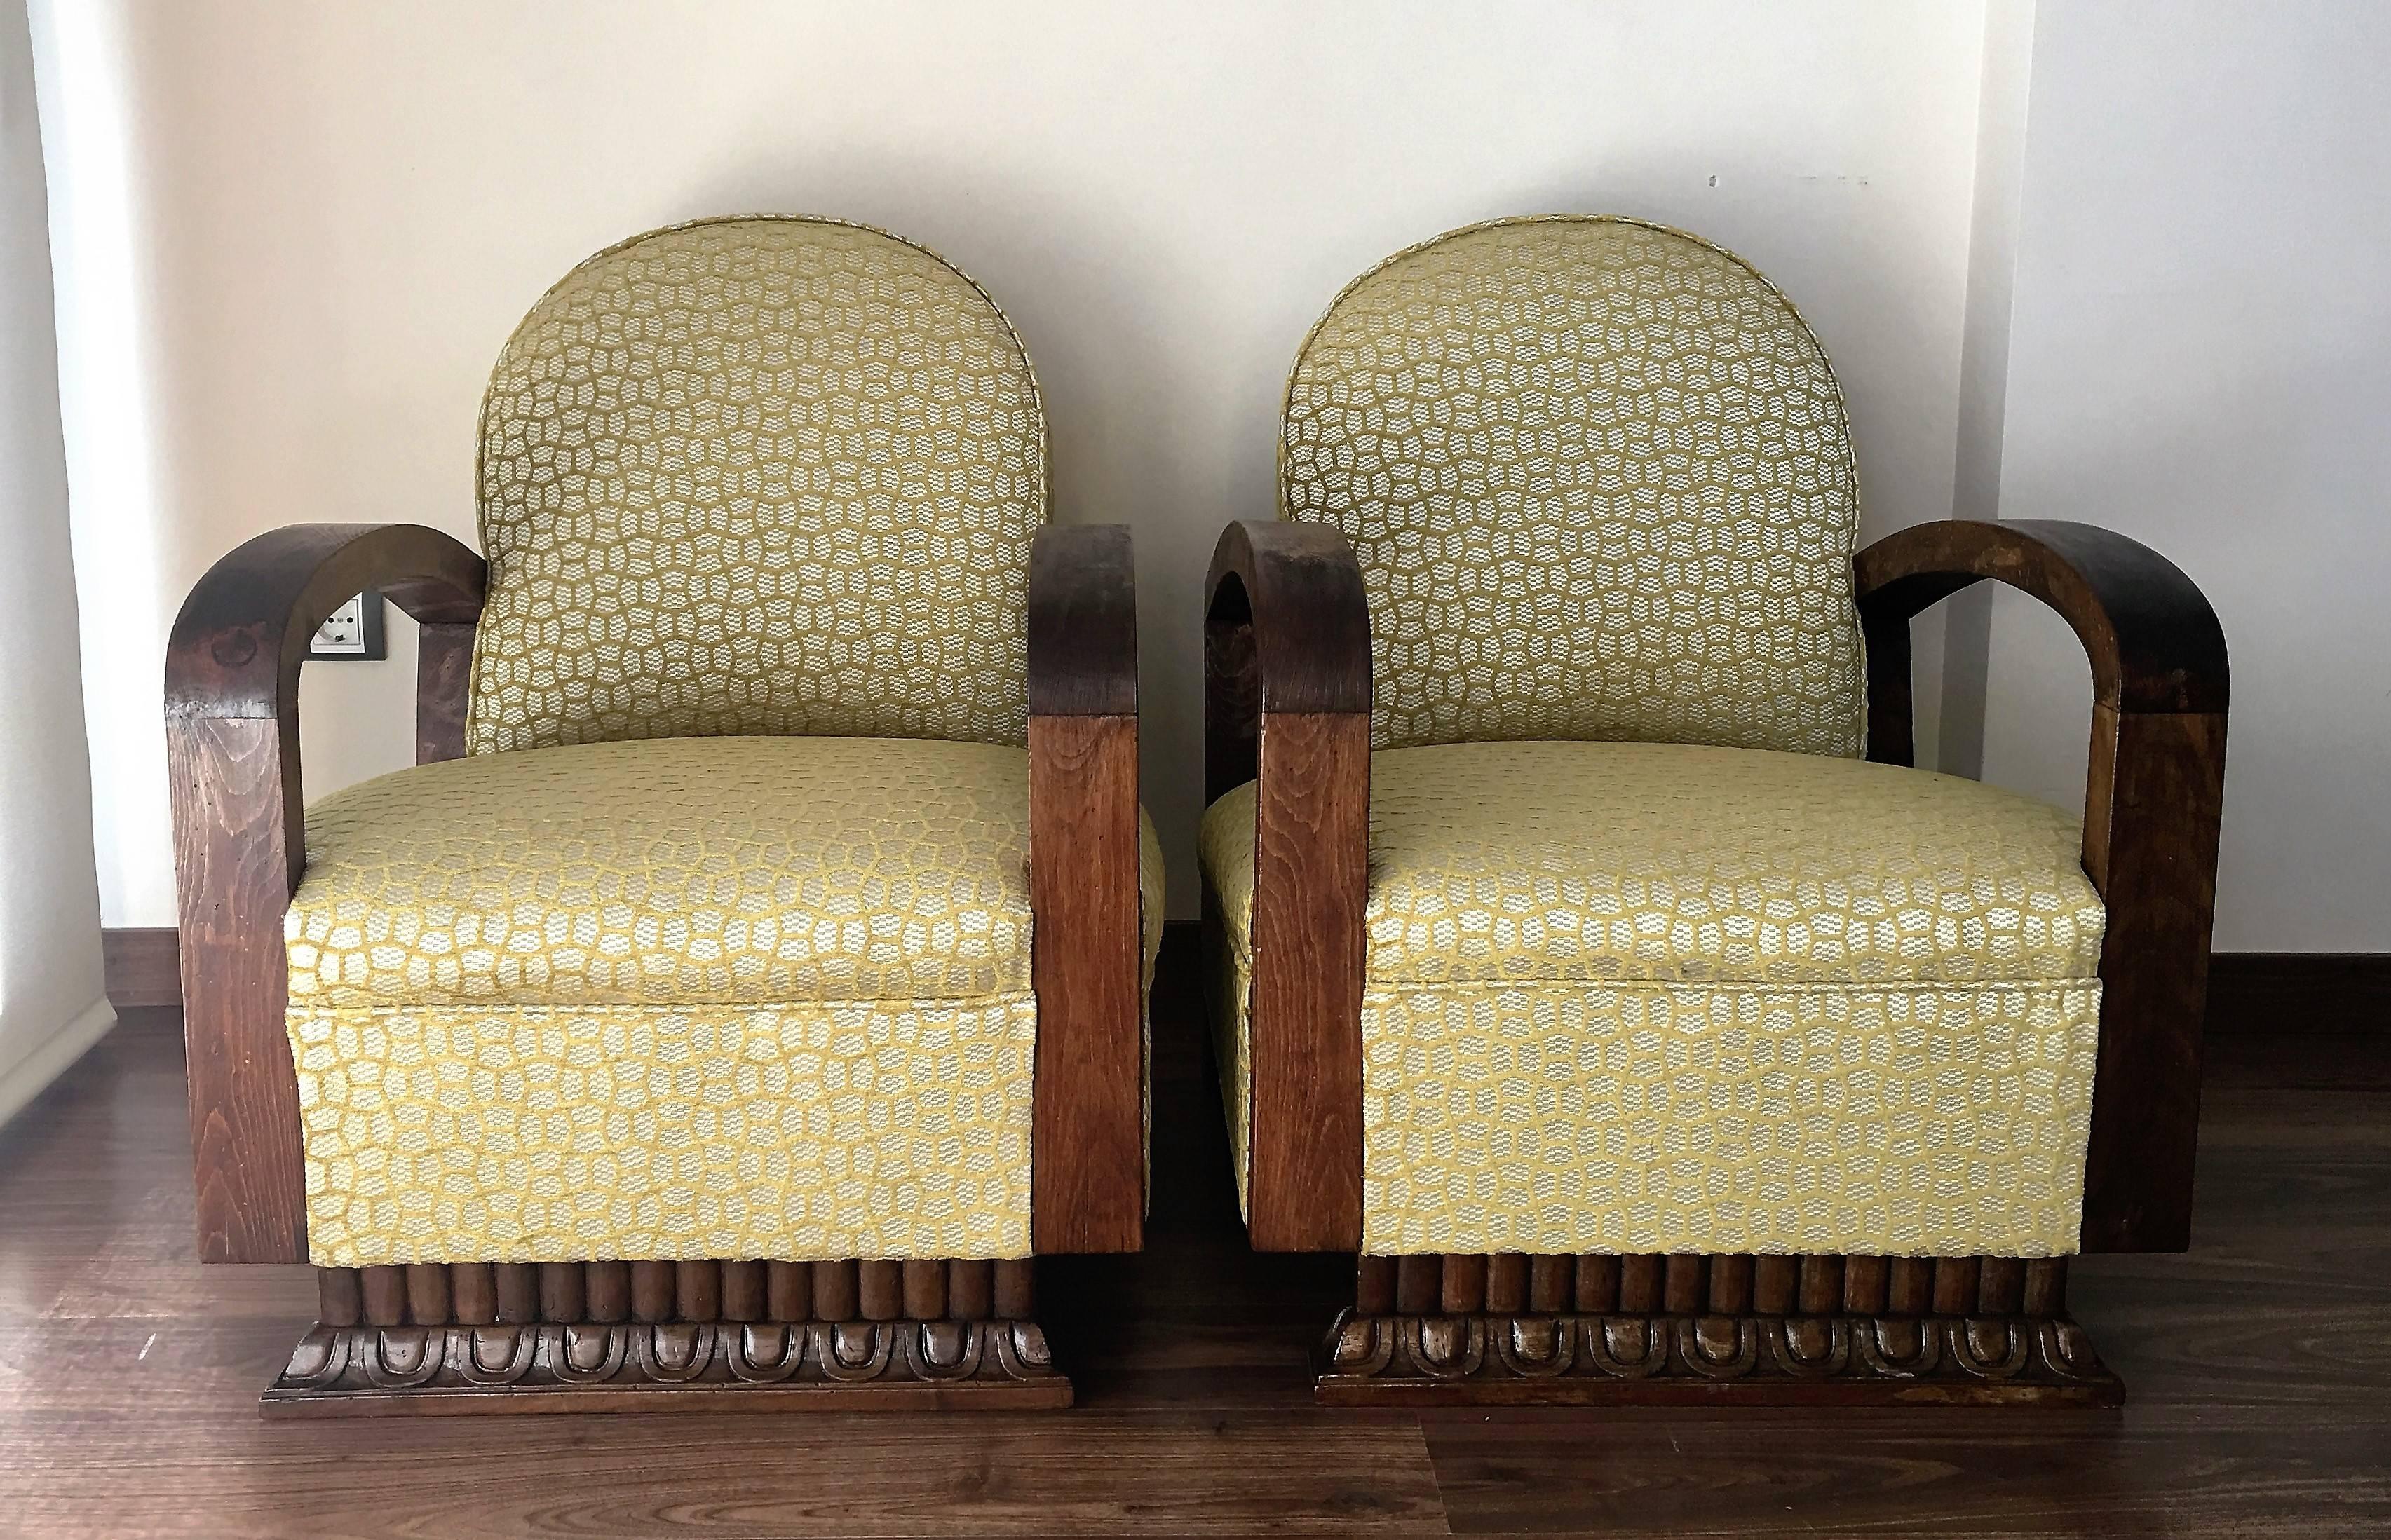 Pair of midcentury armchairs Art Deco style.
New upholstered of Lizzo, Italy.
Very comfortable and elegant style.